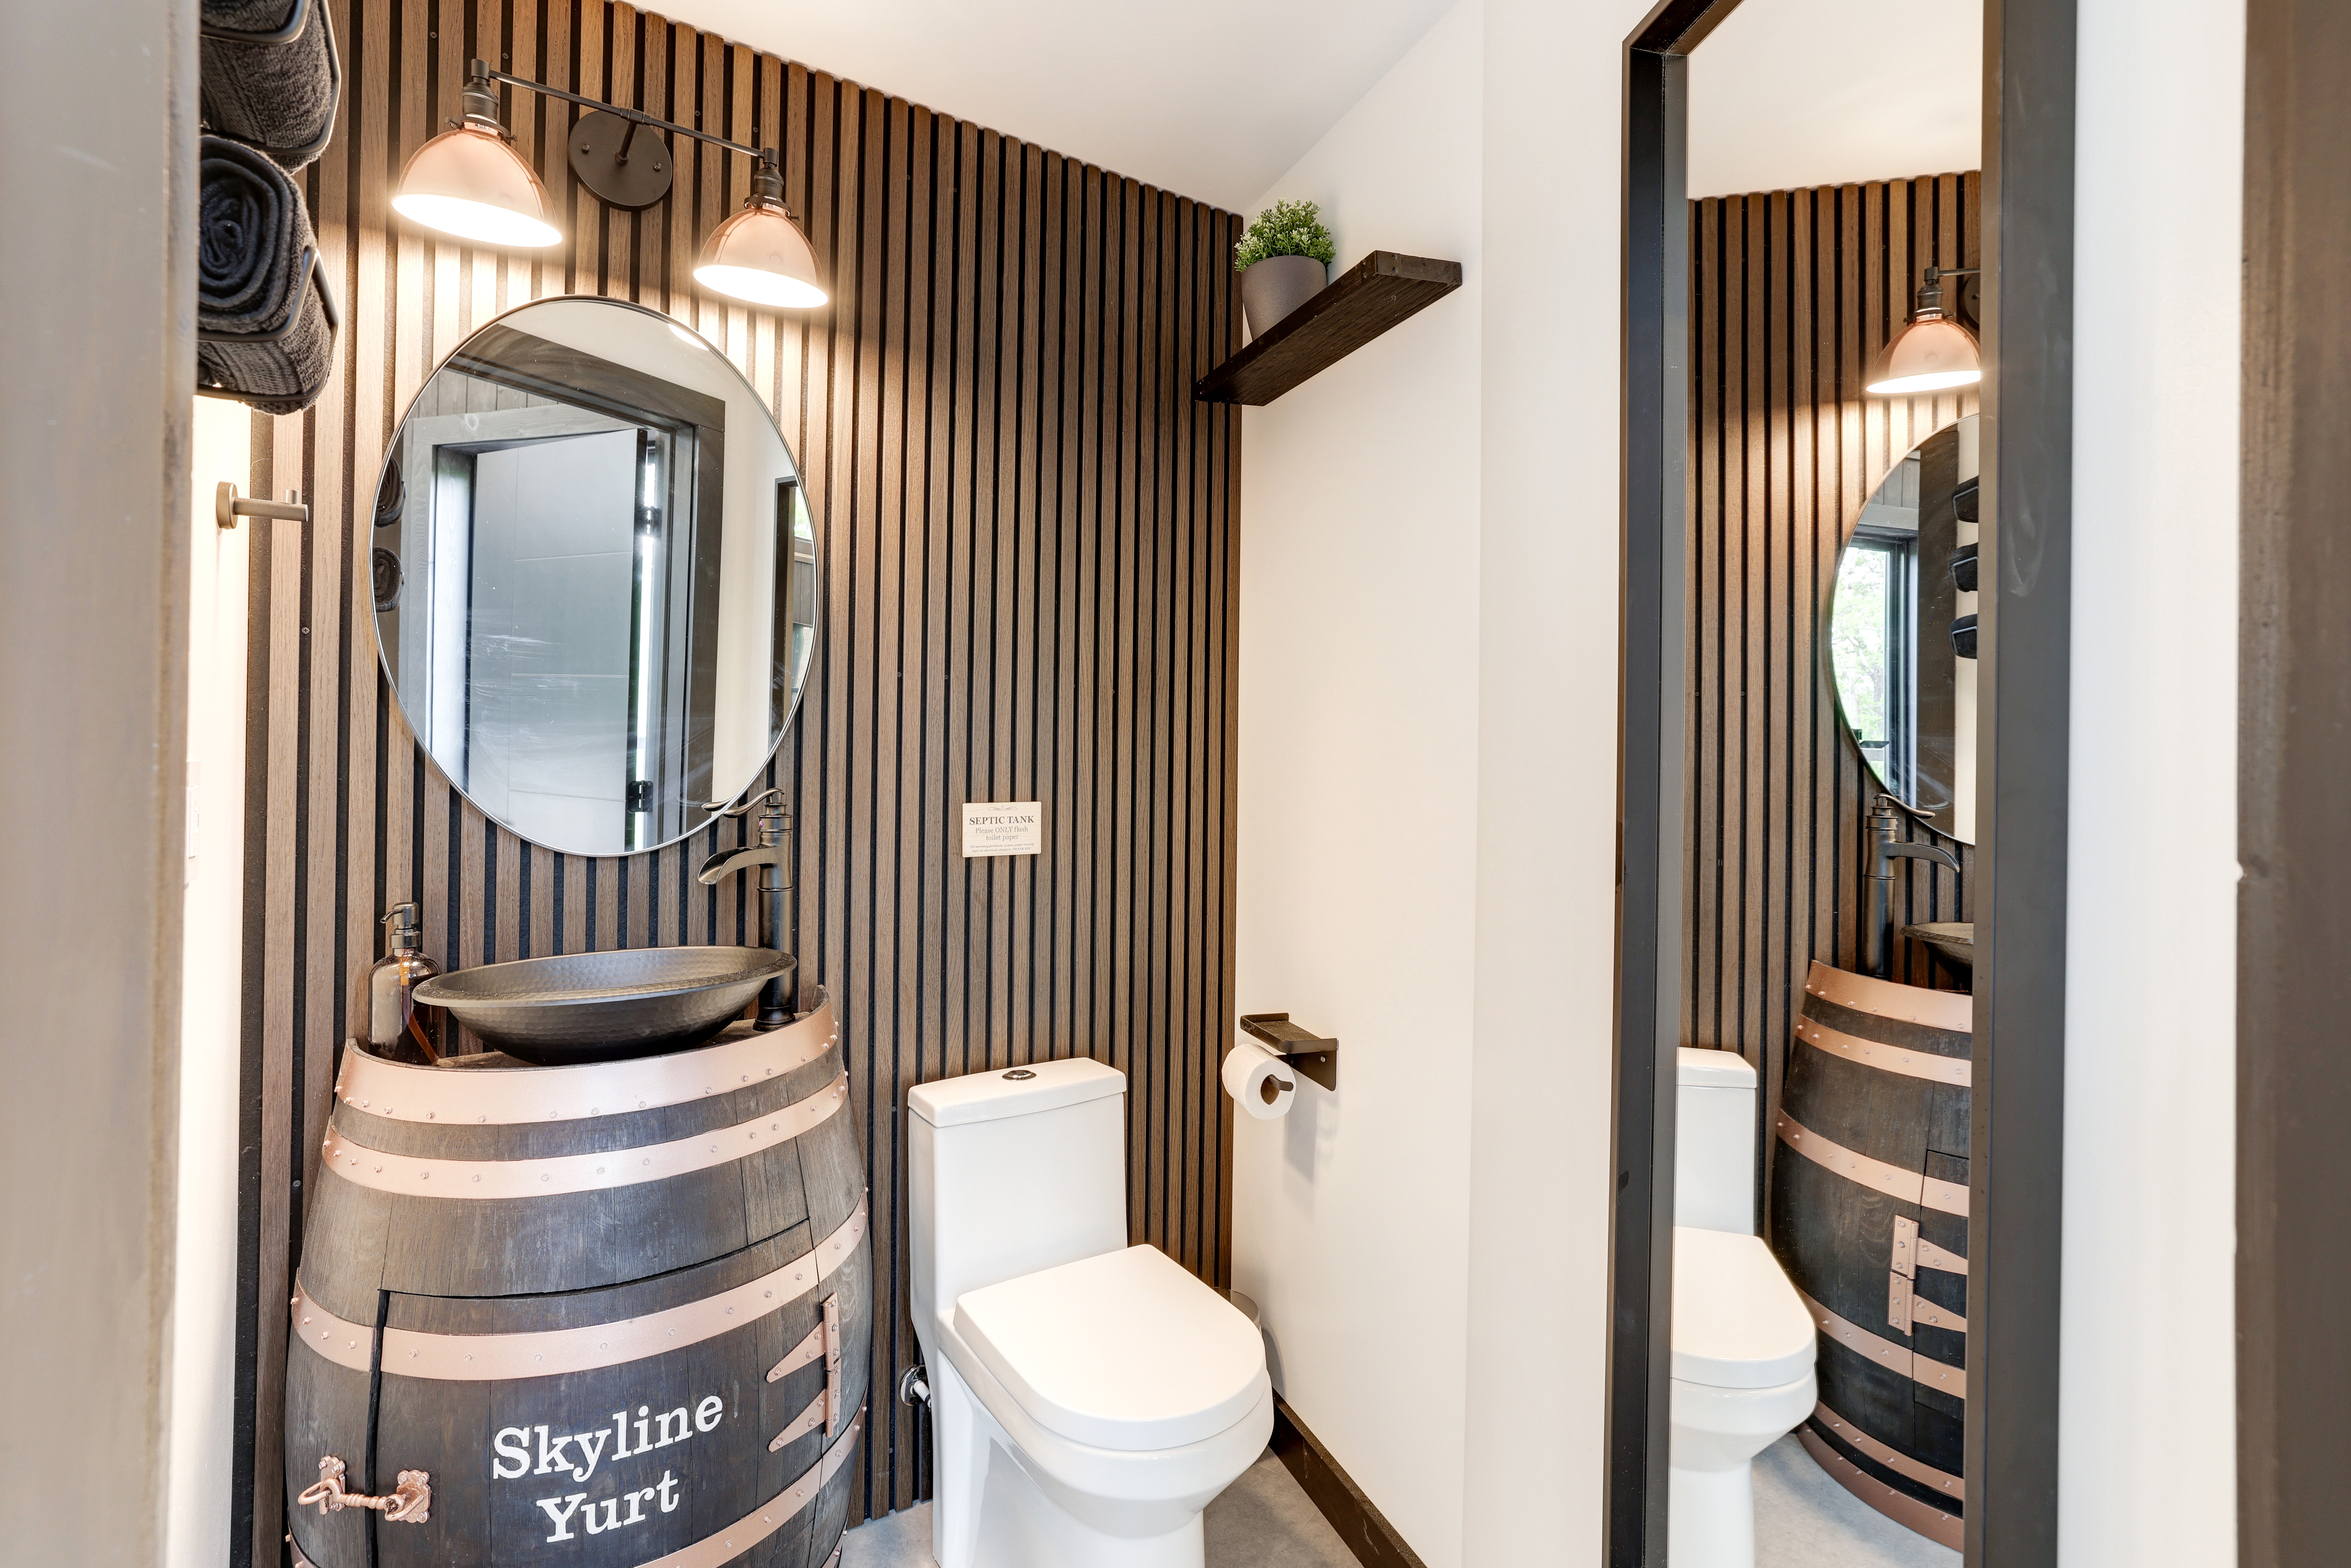 <span  class="uc_style_uc_tiles_grid_image_elementor_uc_items_attribute_title" style="color:#ffffff;">Cozy Modern Second Bathroom, Half-Barrel Sink, Large Mirror, and Towels - Skyline Yurt</span>